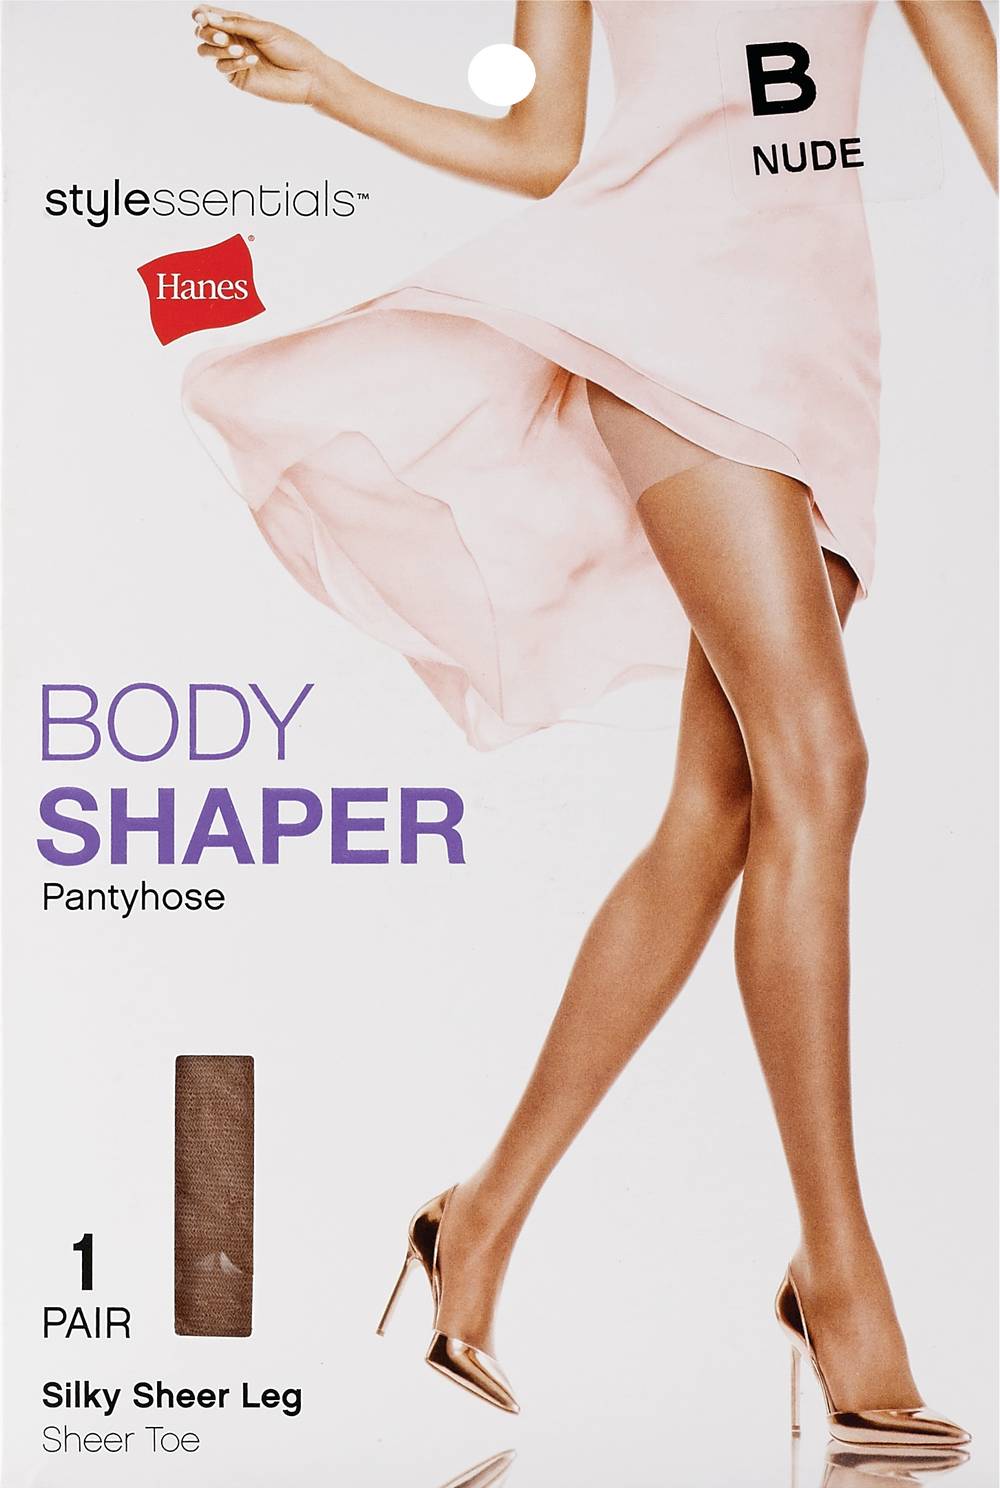 Style Essentials by Hanes Body Shaper Pantyhose, Nude, Size B